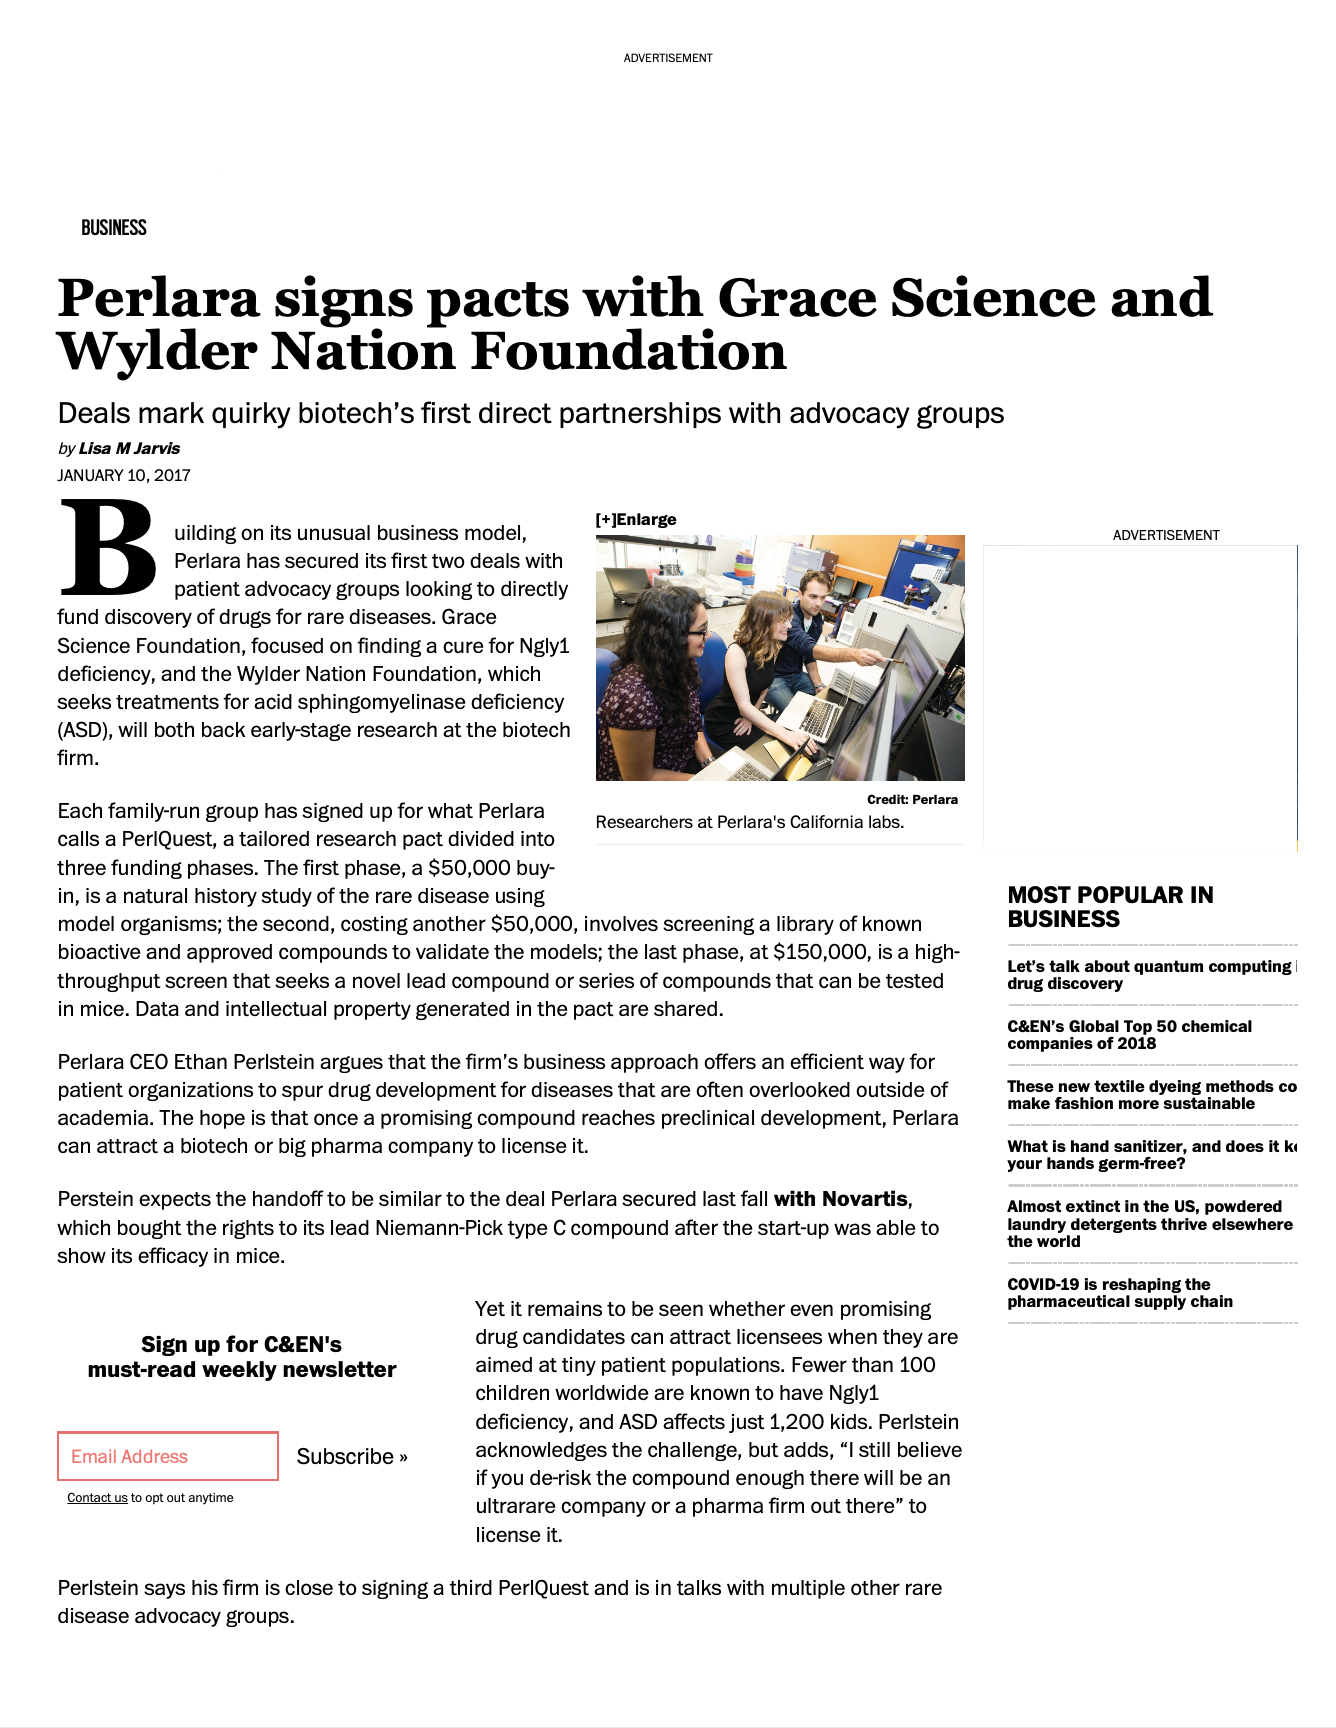 Perlara signs pacts with Grace Science and Wylder Nation Foundation